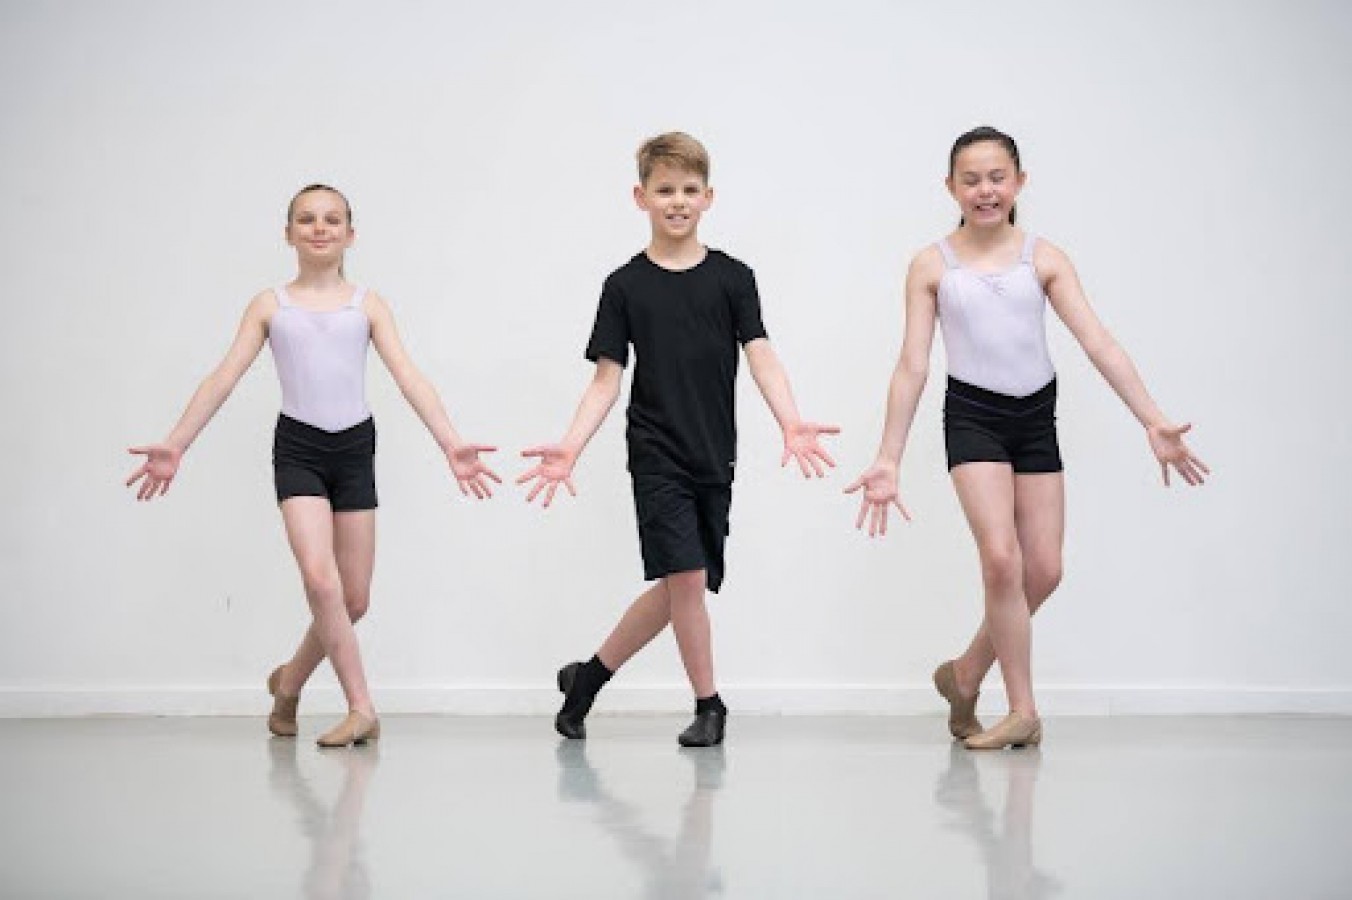  Jazz Dance: Definition, History, and More